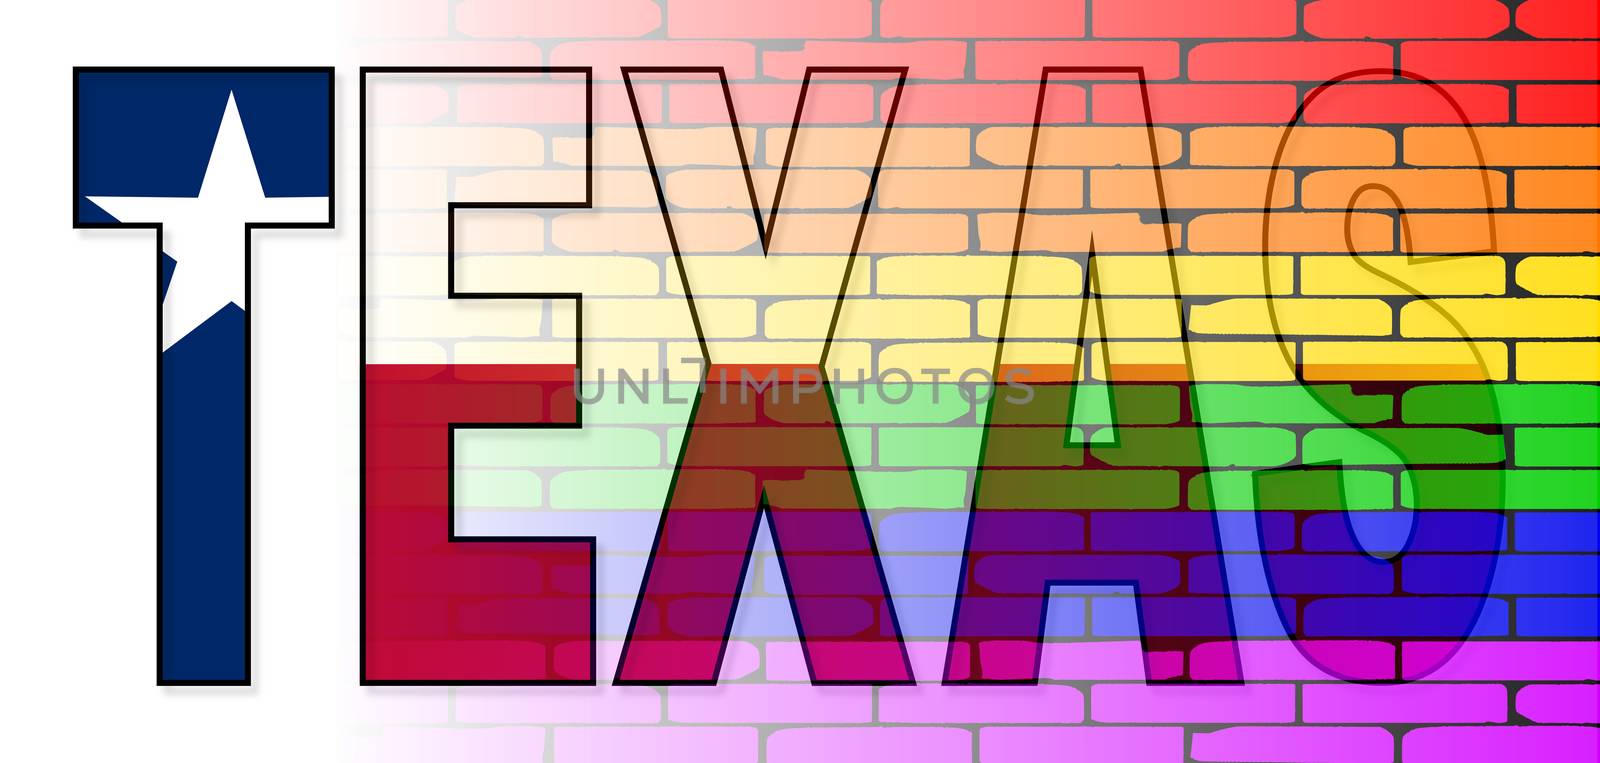 A well worn wall painted in the colours of the LGBT flag with a Texan flag as text